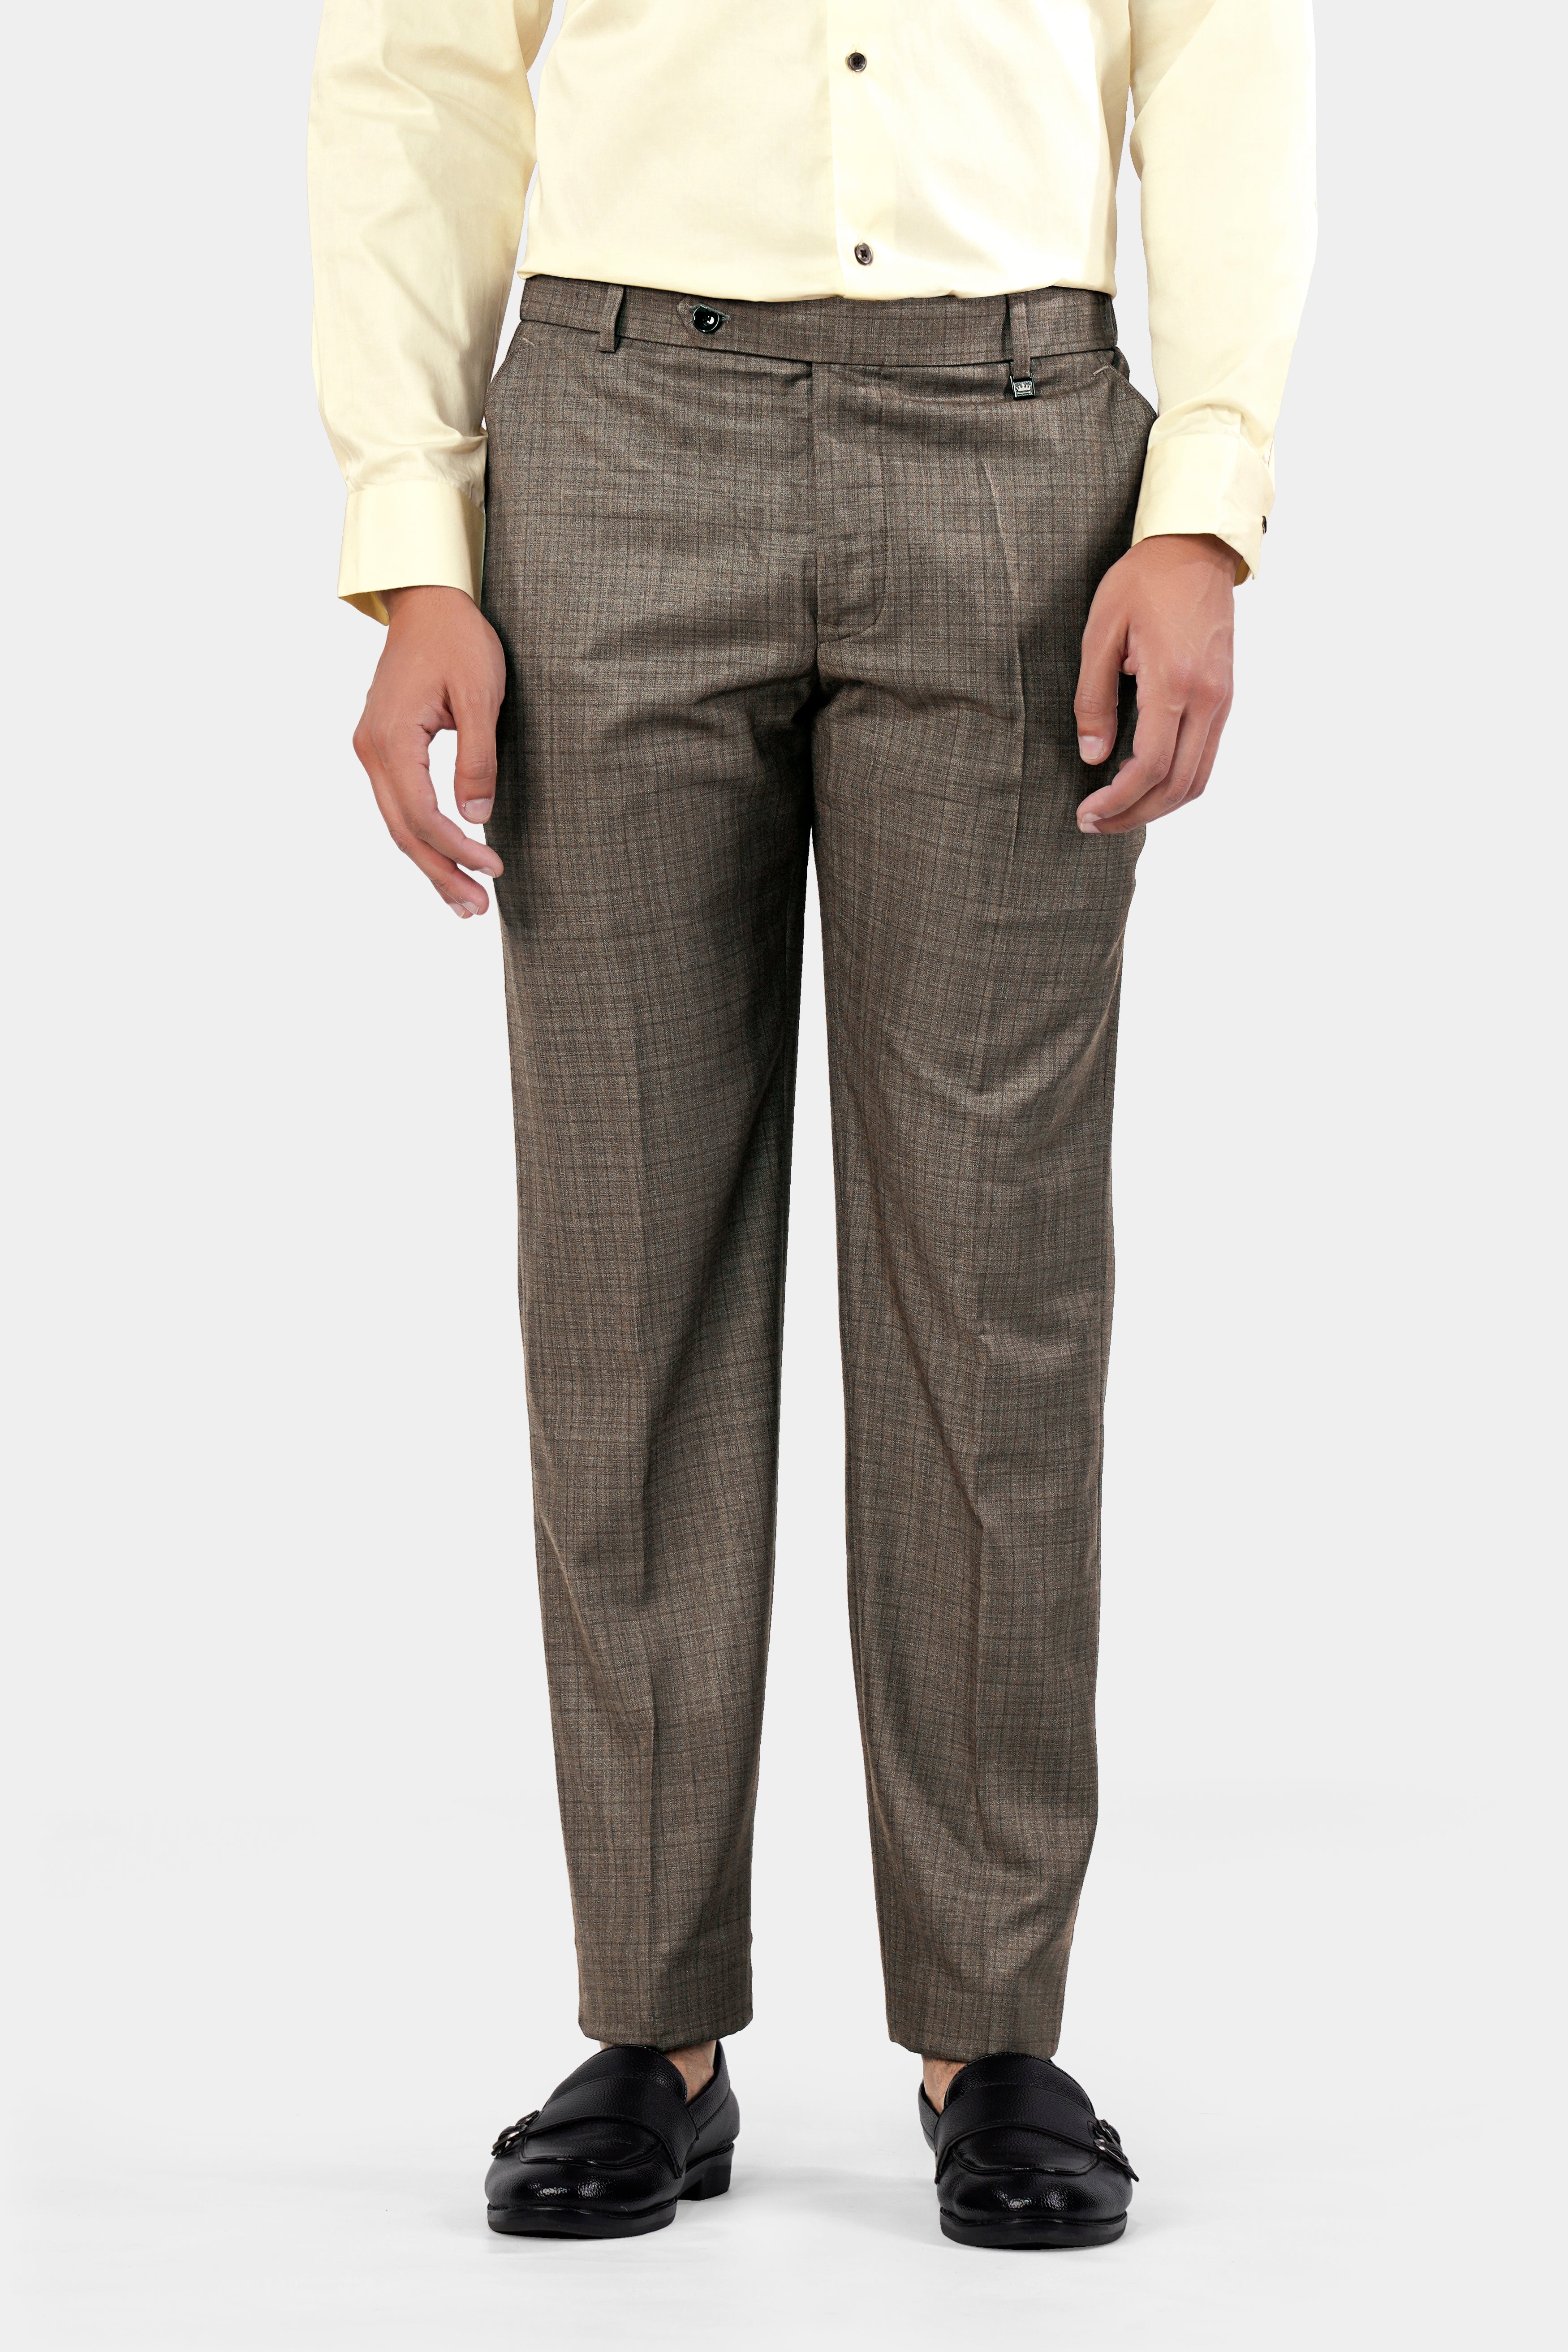 Hemp Brown Checkered Wool Rich Double Breasted Suit ST2935-DB-36, ST2935-DB-38, ST2935-DB-40, ST2935-DB-42, ST2935-DB-44, ST2935-DB-46, ST2935-DB-48, ST2935-DB-50, ST2935-DB-52, ST2935-DB-54, ST2935-DB-56, ST2935-DB-58, ST2935-DB-60